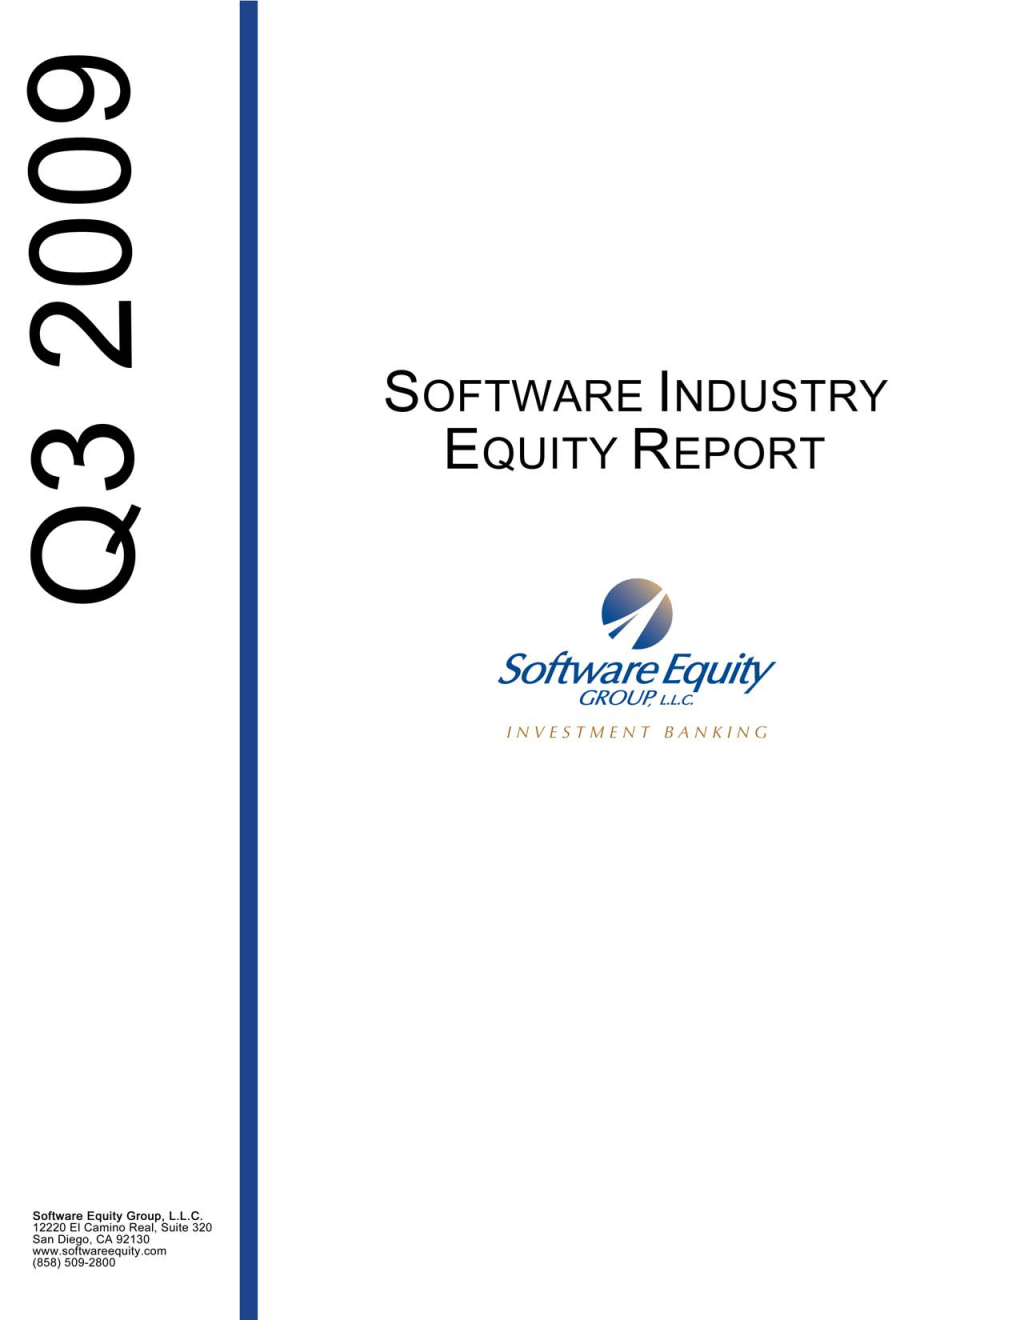 3Q09 Software Industry Equity Report.Pdf